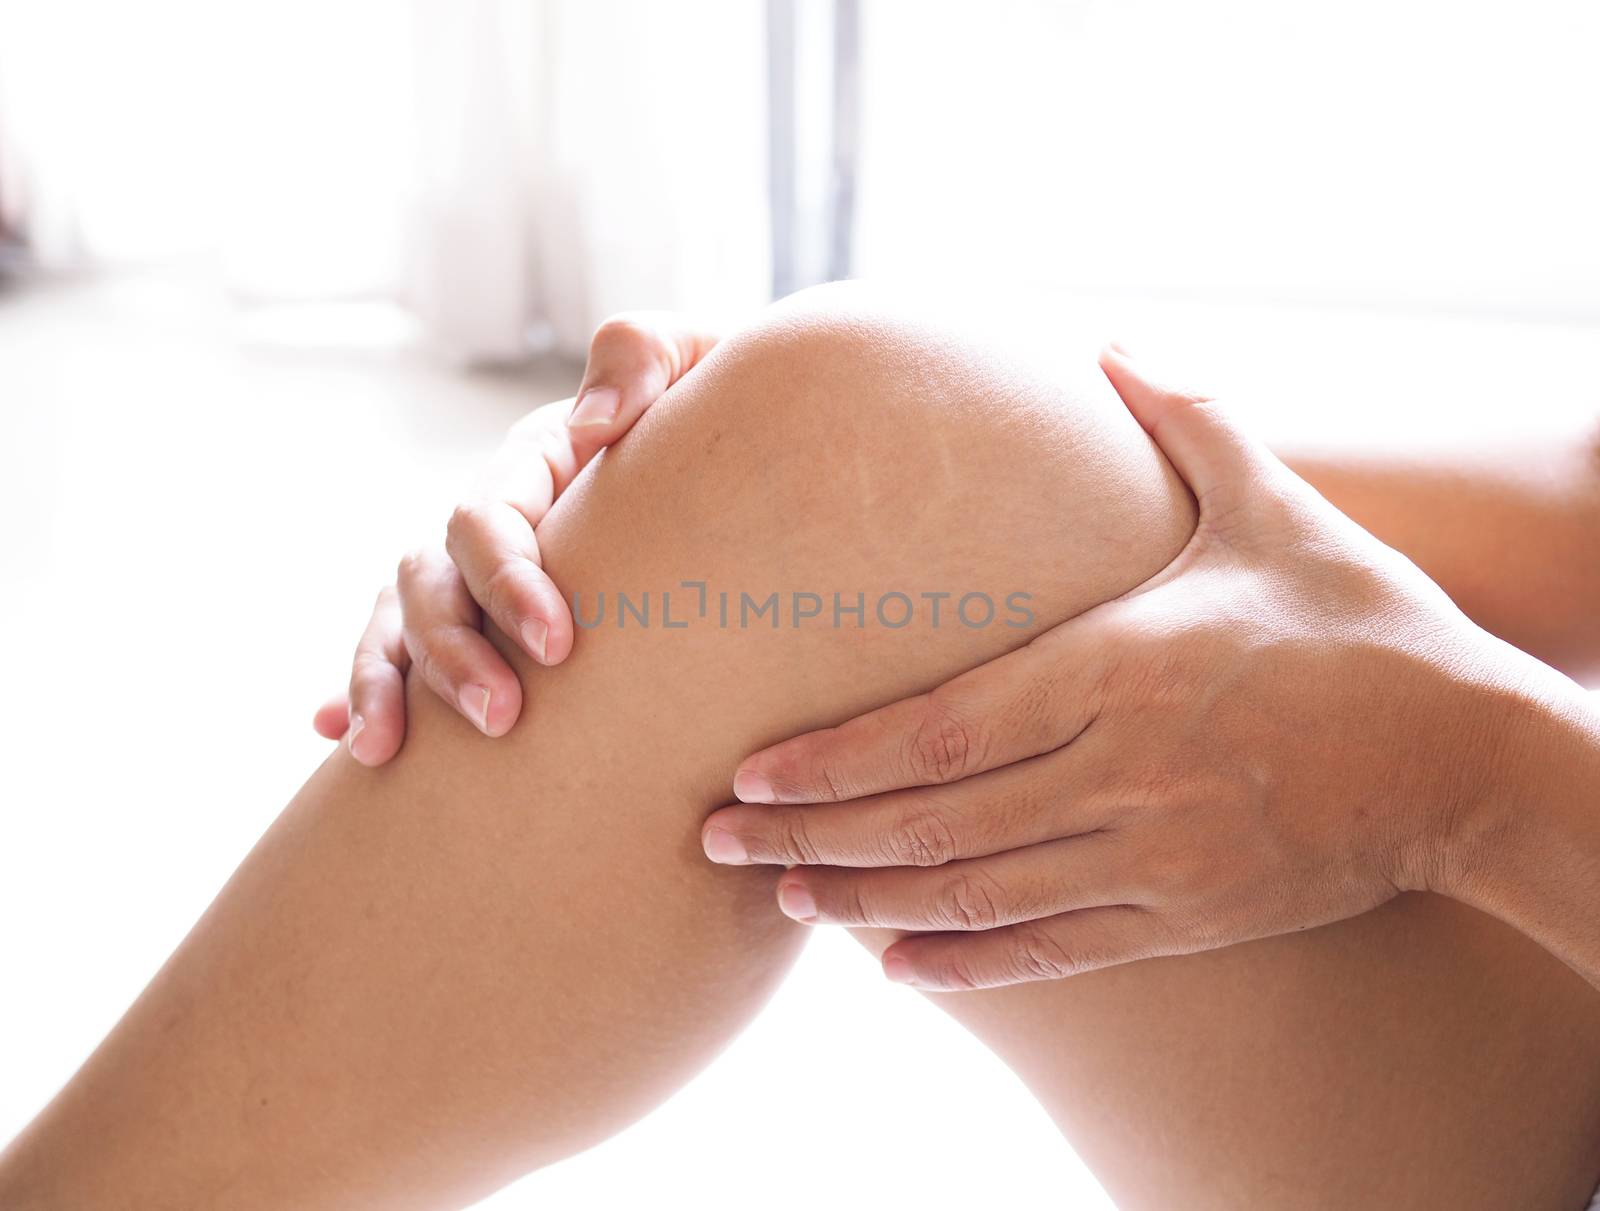 Asian woman suffering from Leg and knee pain, Have symptoms muscle injury or chronic tendon inflammation.